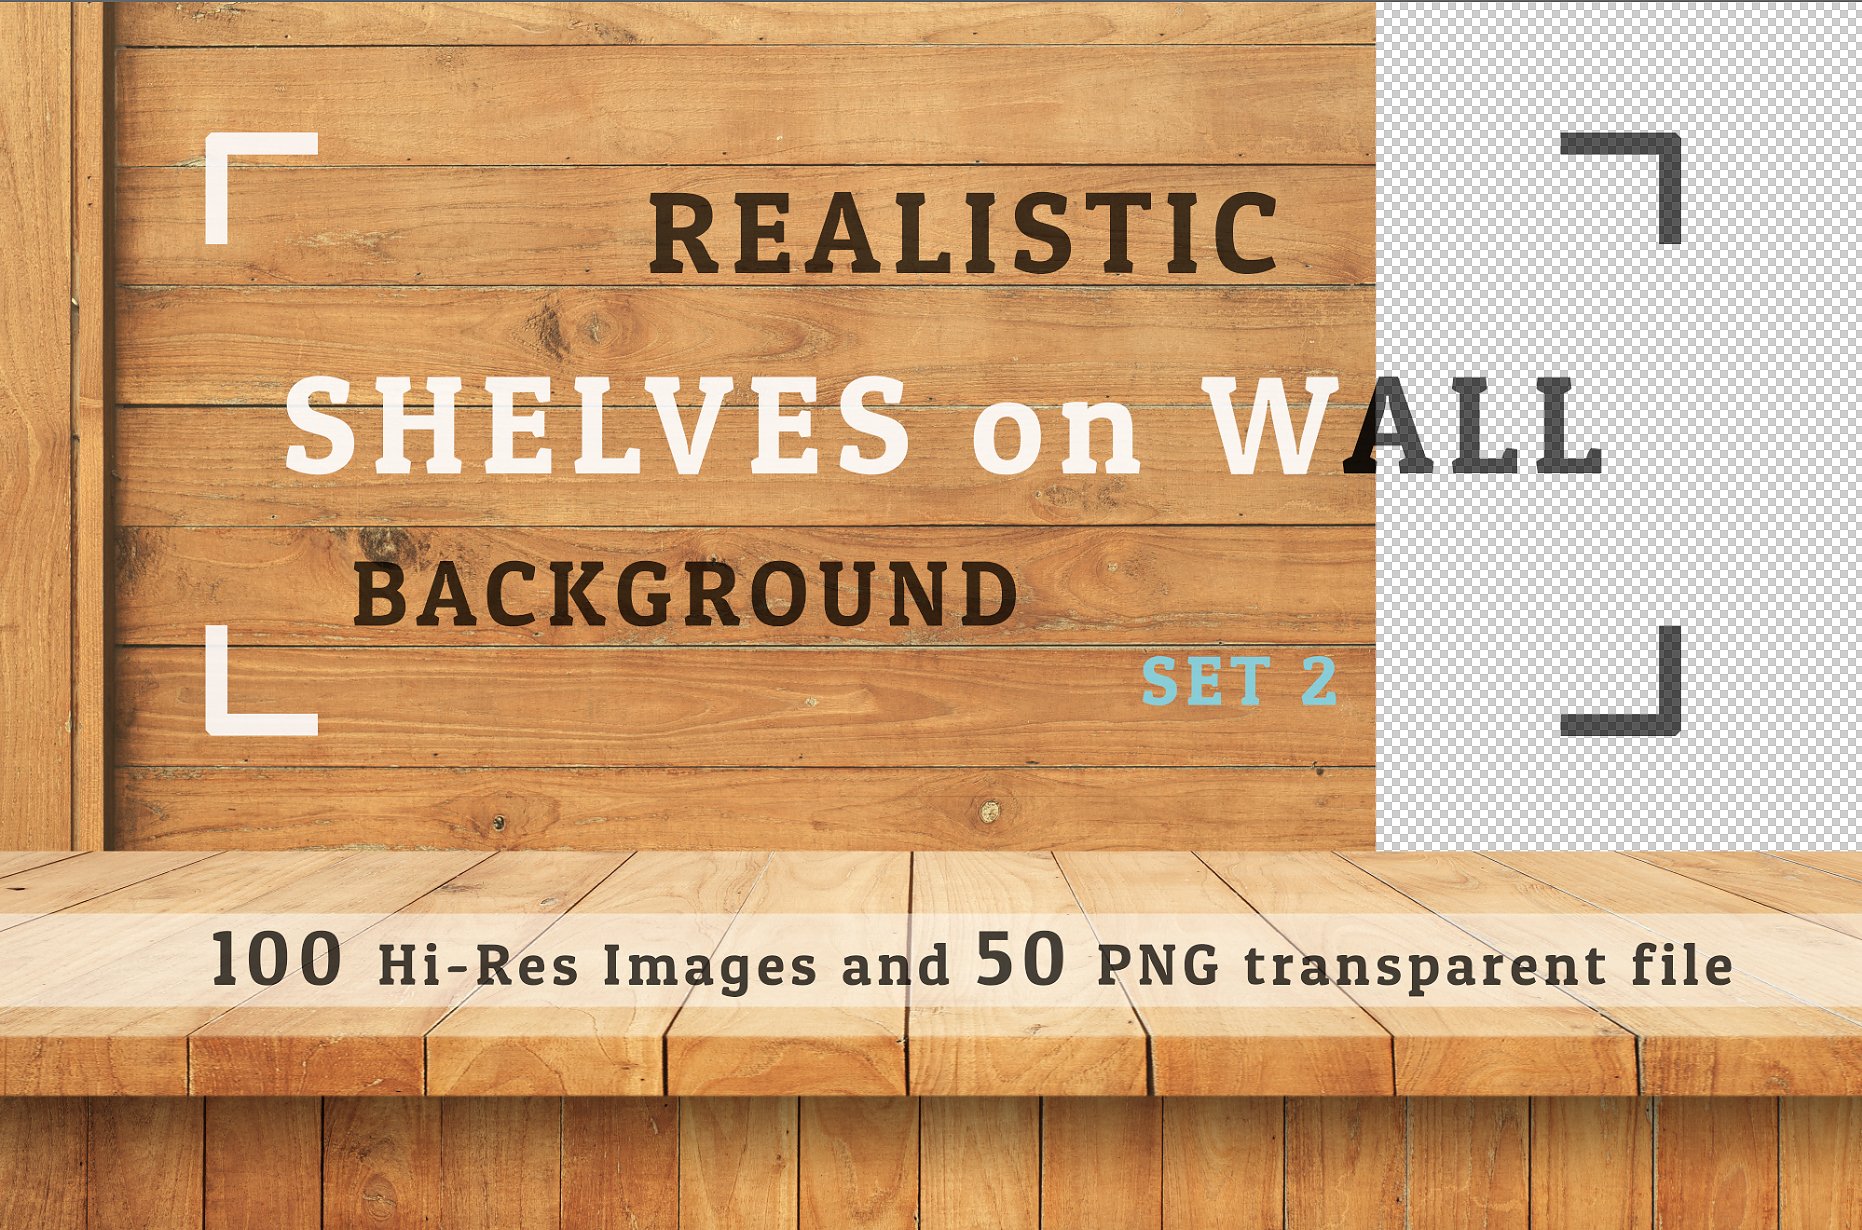 100 2 realistic shelves and wall background set 2 cover in 8 aug 2016 181